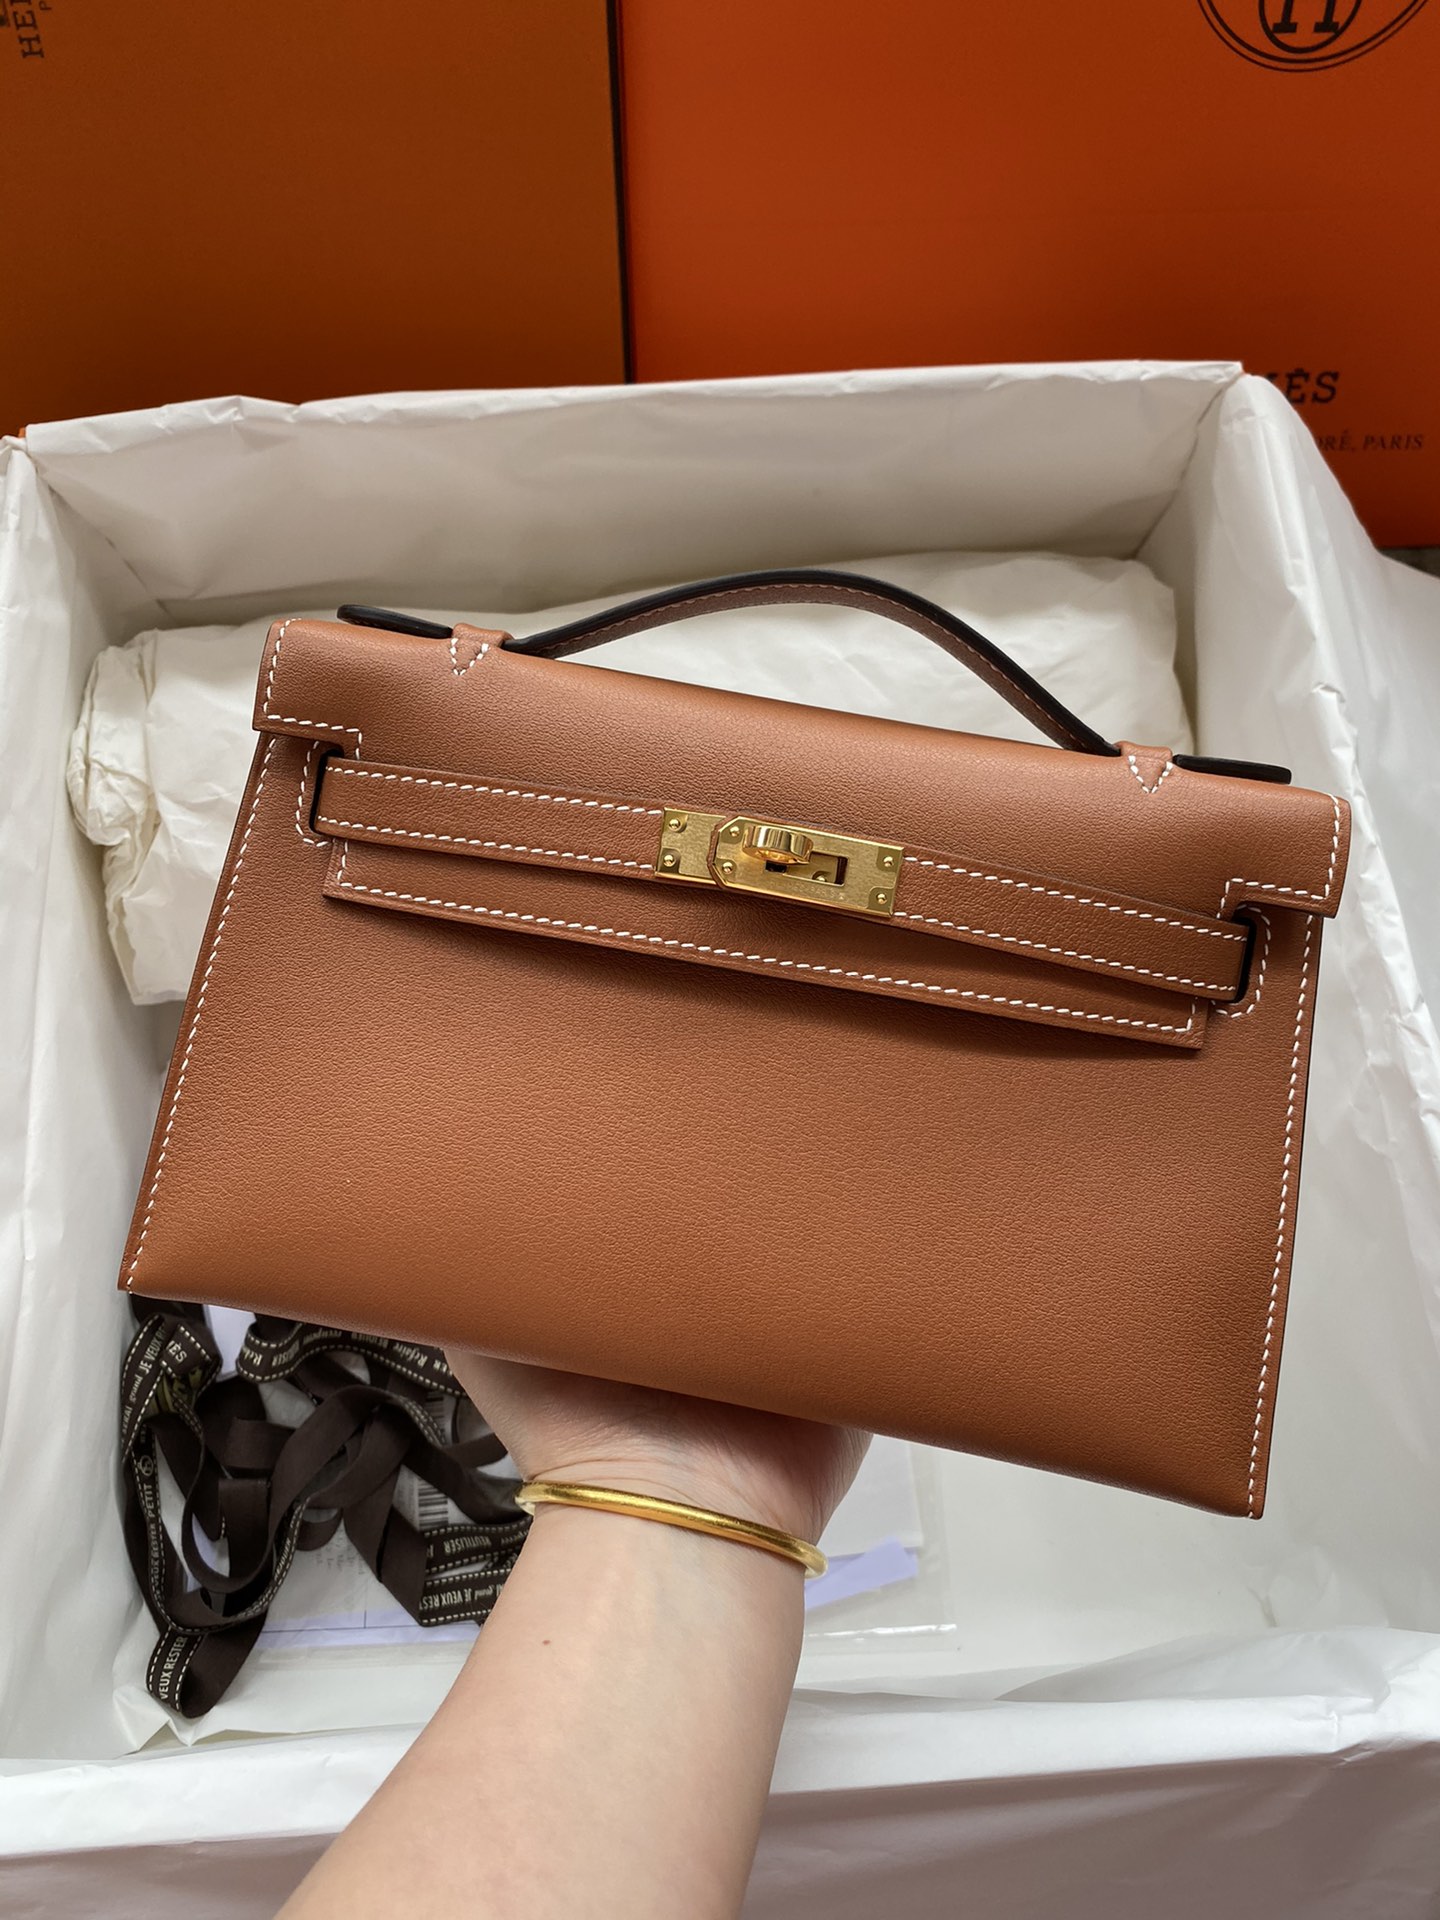 Hermes Kelly Handbags Clutches & Pouch Bags Crossbody & Shoulder Bags Wholesale Replica
 Brown Coffee Color Gold Hardware Mini